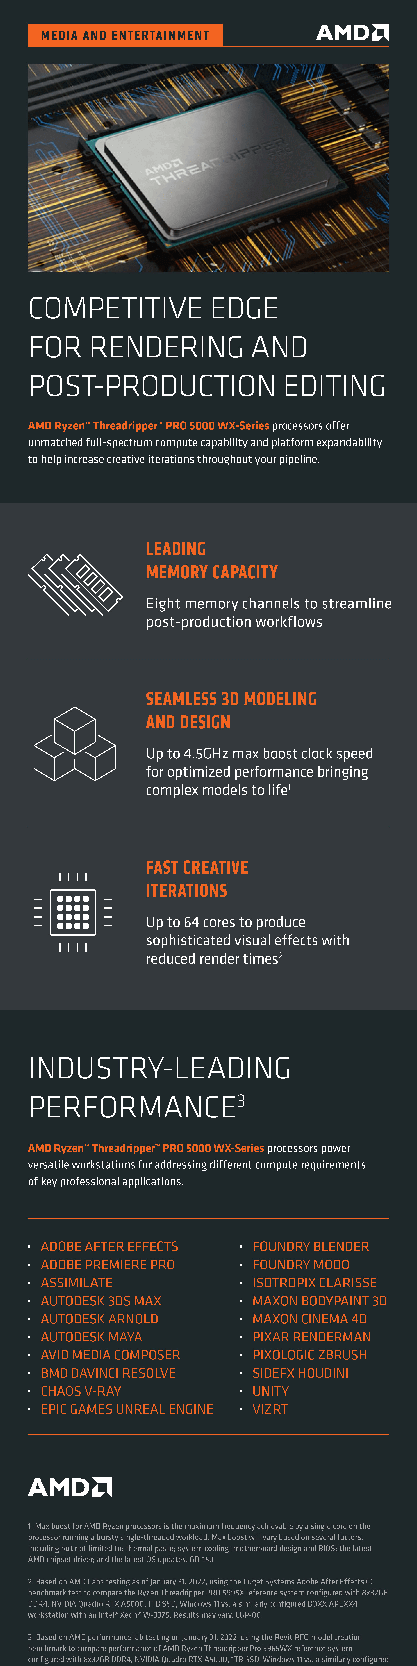 An infographic outlining the benefits of AMD Threadripper PRO processors for media and entertainment.